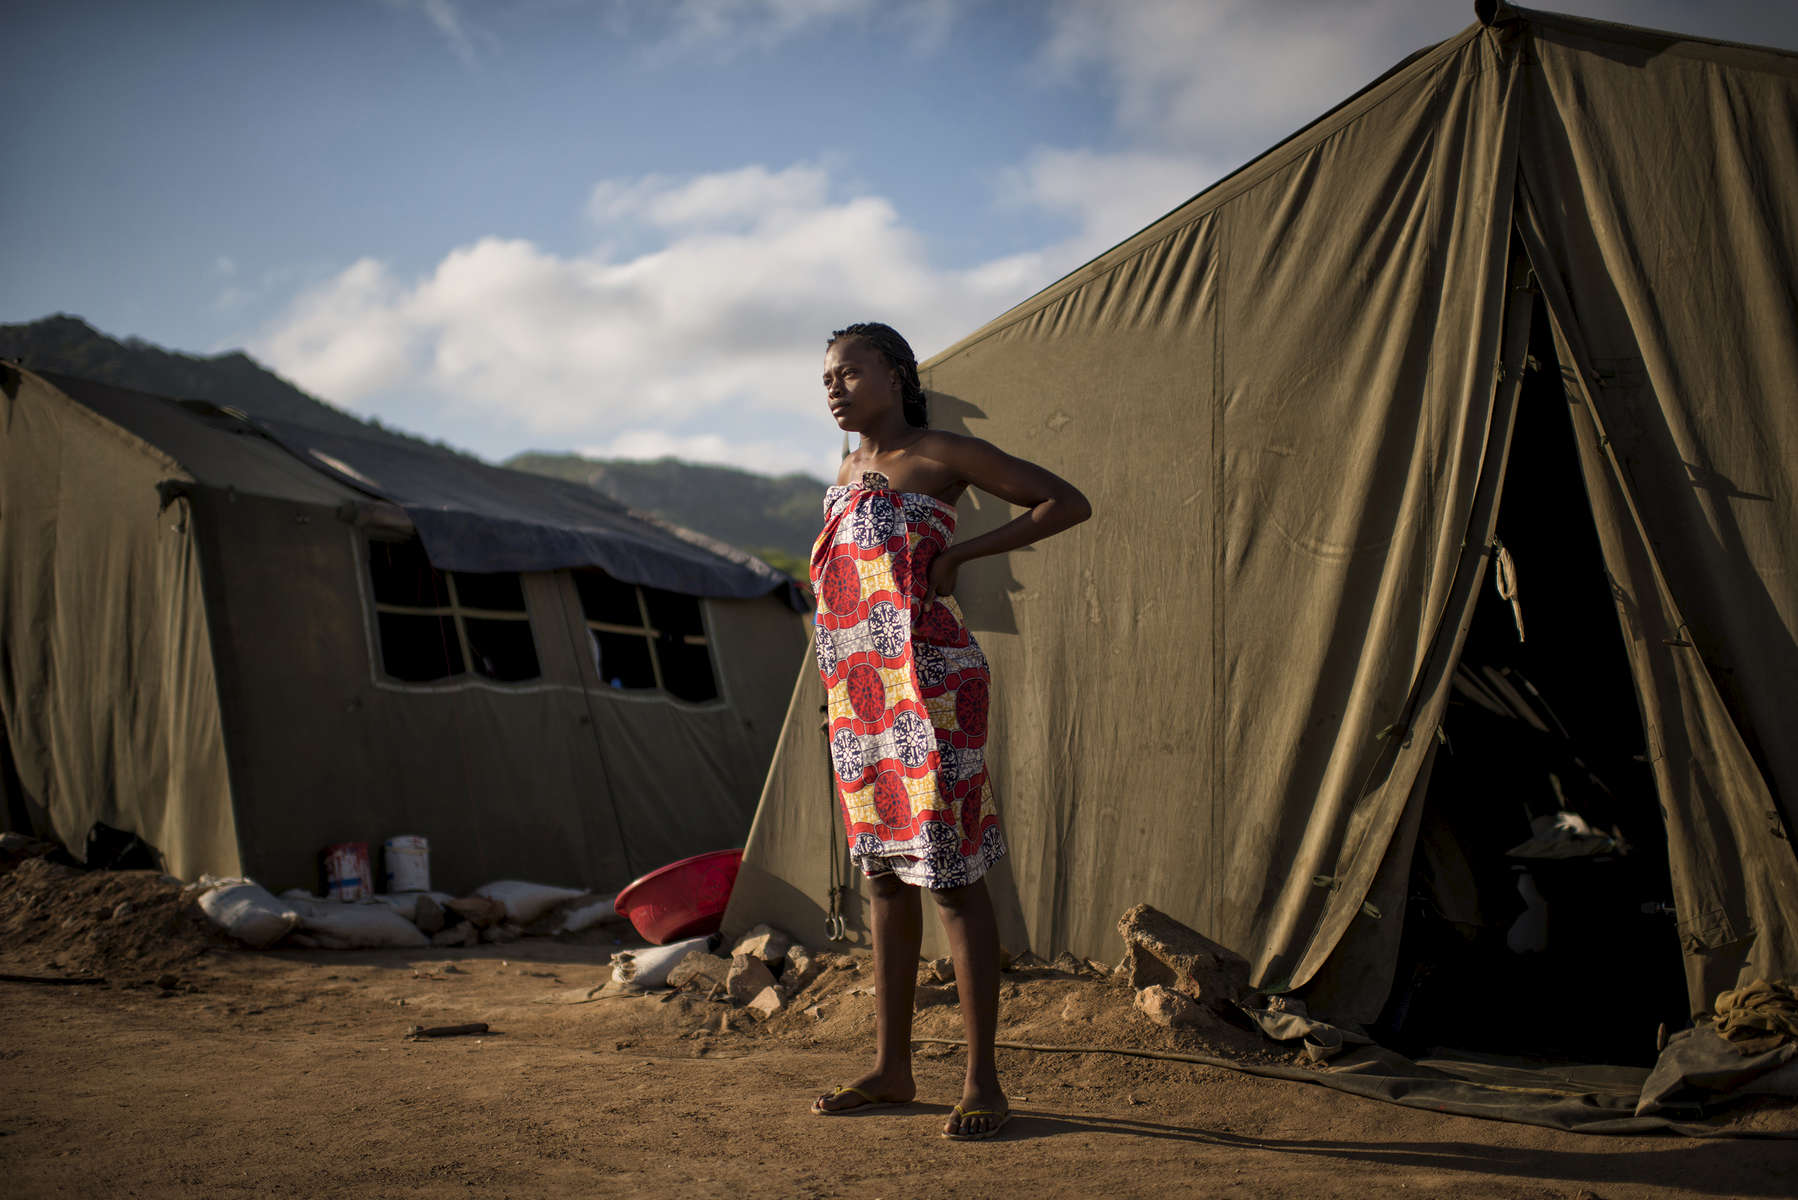 May 6, 2018: KANENGUERERE, ANGOLA -HALO deminer Rosalina Loth stands in front of her tent on Sunday morning. The HALO team has Sundays off, so the day is spent going to church, relaxing, and getting caught up on work. These deminers are working under extremely difficult circumstances in Kanenguerere.  Not only is extremely hot - with snakes and scorpions common - but much of the mined area is on the side of an extremely steep hill, making every step dangerous. The area was mined during the civil war by government forces to protect the nearby railway line that can be seen in the background, as well as various troop positions. It is currently used by roughly 170 people including village residents and nomadic herders - many of whom are young children - who pass through uncleared land every day. 